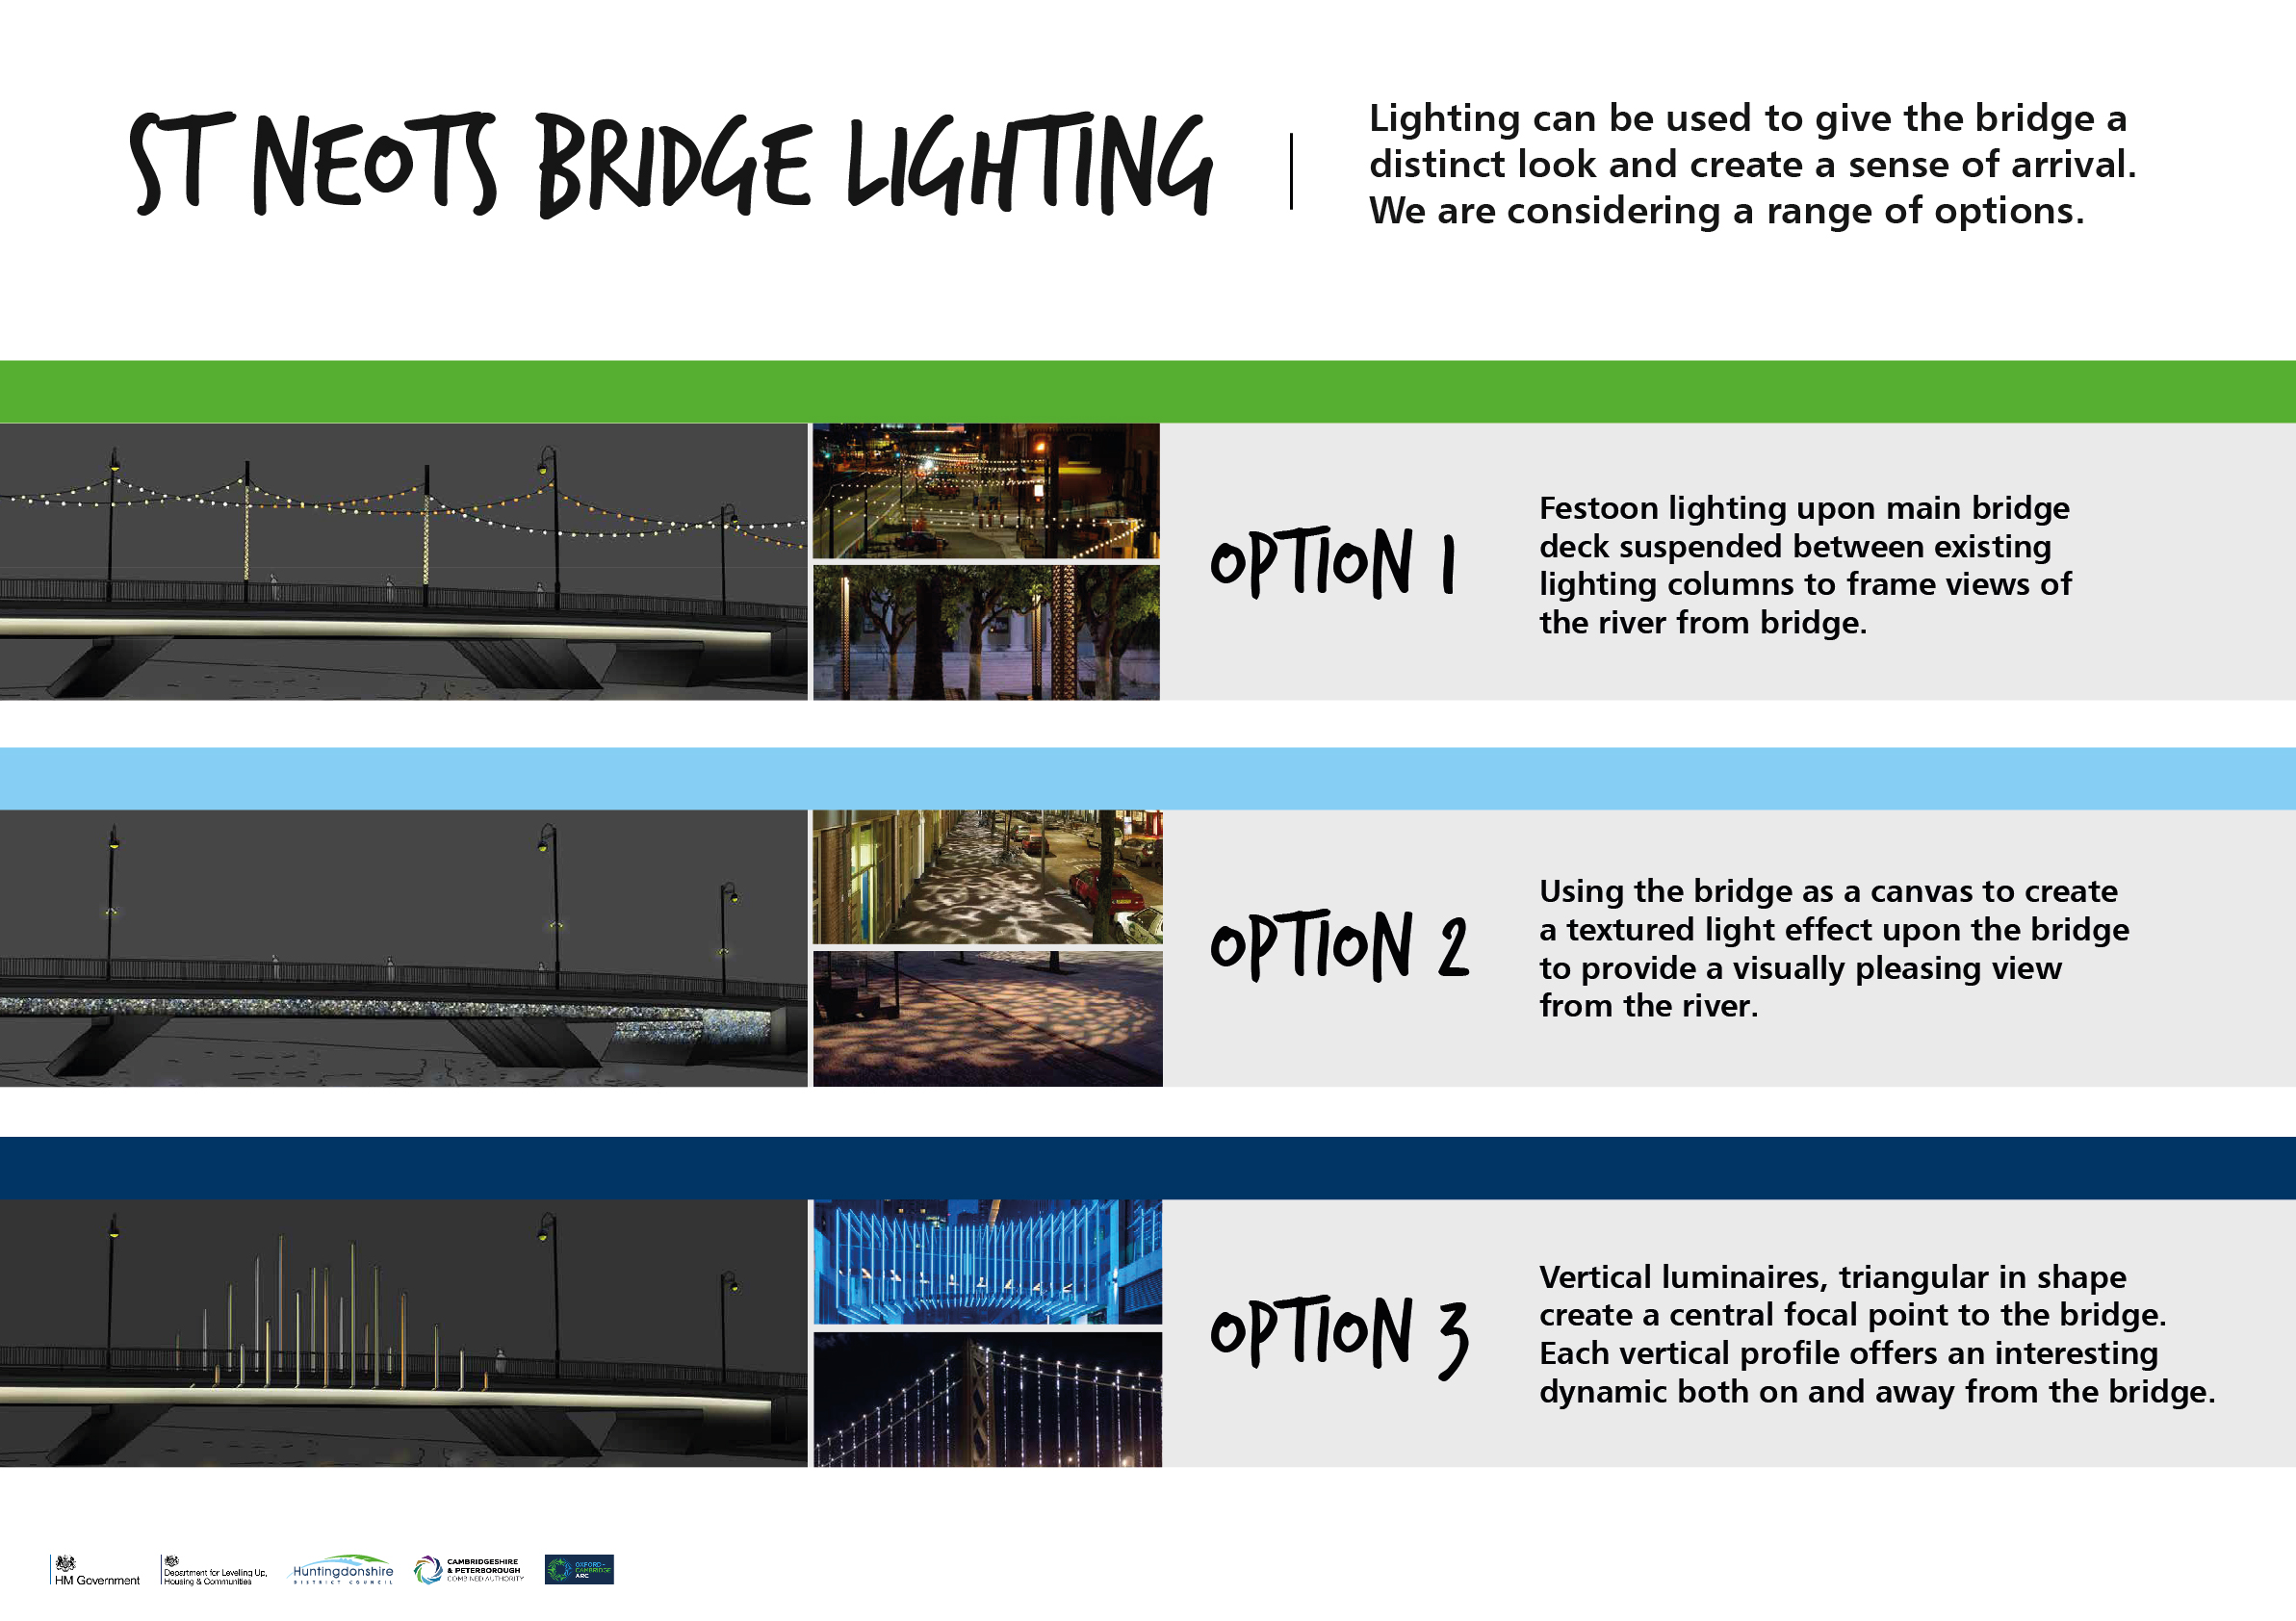 St Neots Bridge Lighting Lighting can be used to give the bridge a distinct look and create a sense of arrival. We are considering a range of options. Option 1 – Festoon lighting upon main bridge deck suspended between existing lighting columns to frame views of the river from the bridge. Option 2 – Using the bridge as a canvas to create a textured light effect upon the bridge to provide a visually pleasing view from the river. Option 3 – Vertical luminaires, triangular in shape create a central focal point to the bridge. Each vertical profile offers an interesting dynamic both on and away from the bridge.